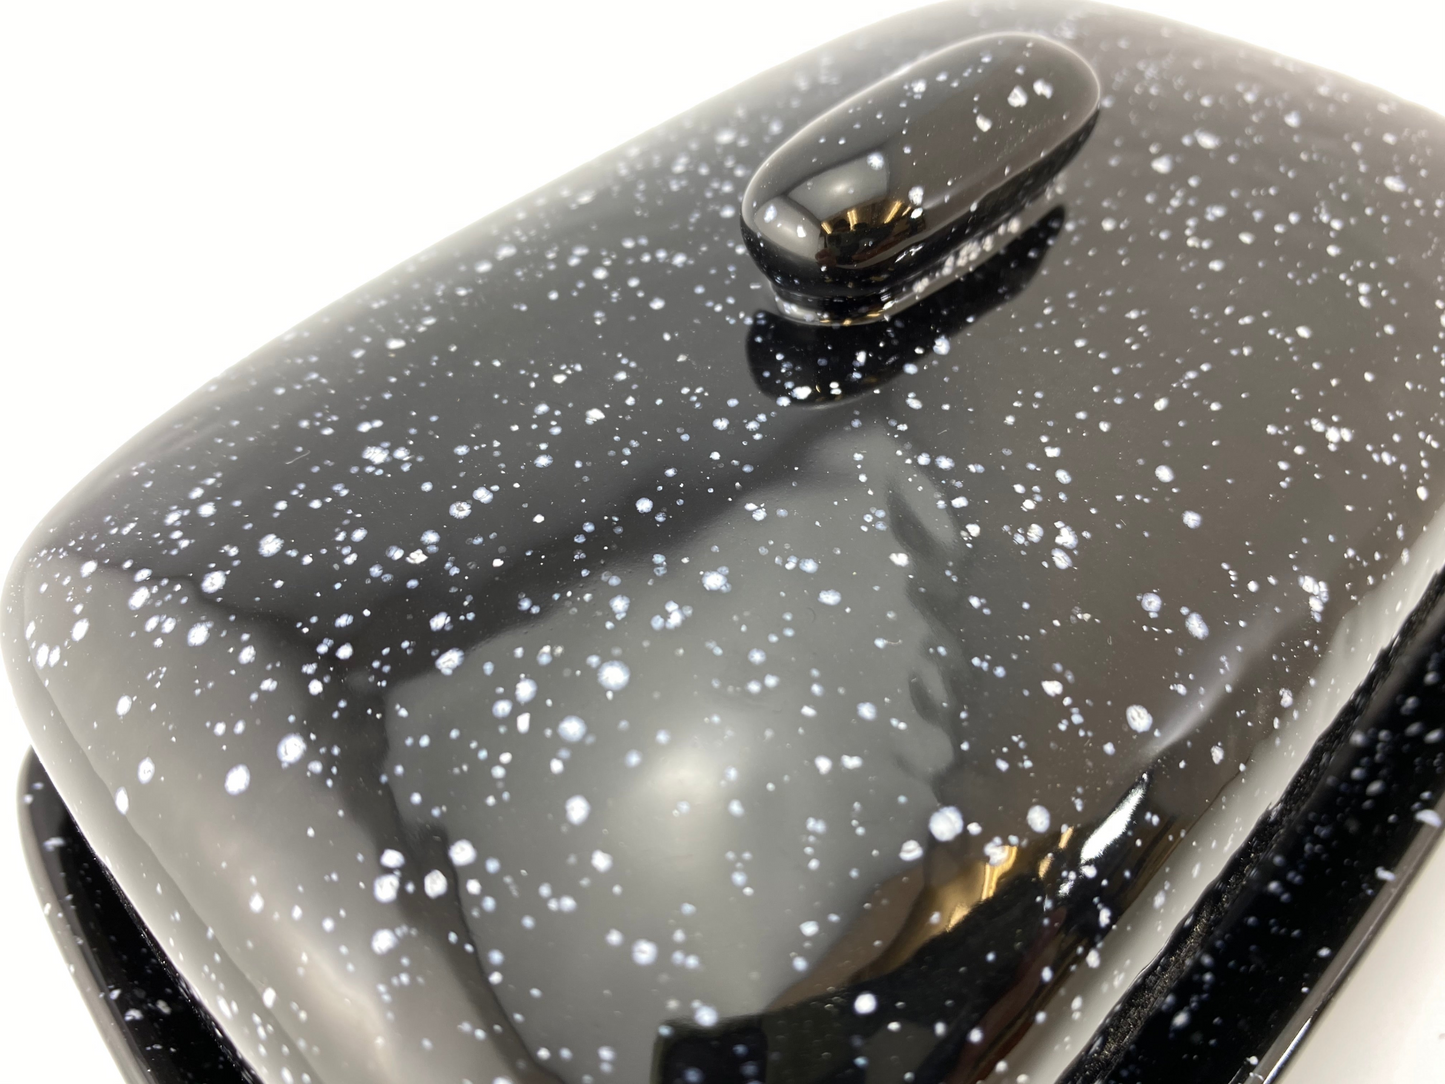 Butter Dish in Speckled Black